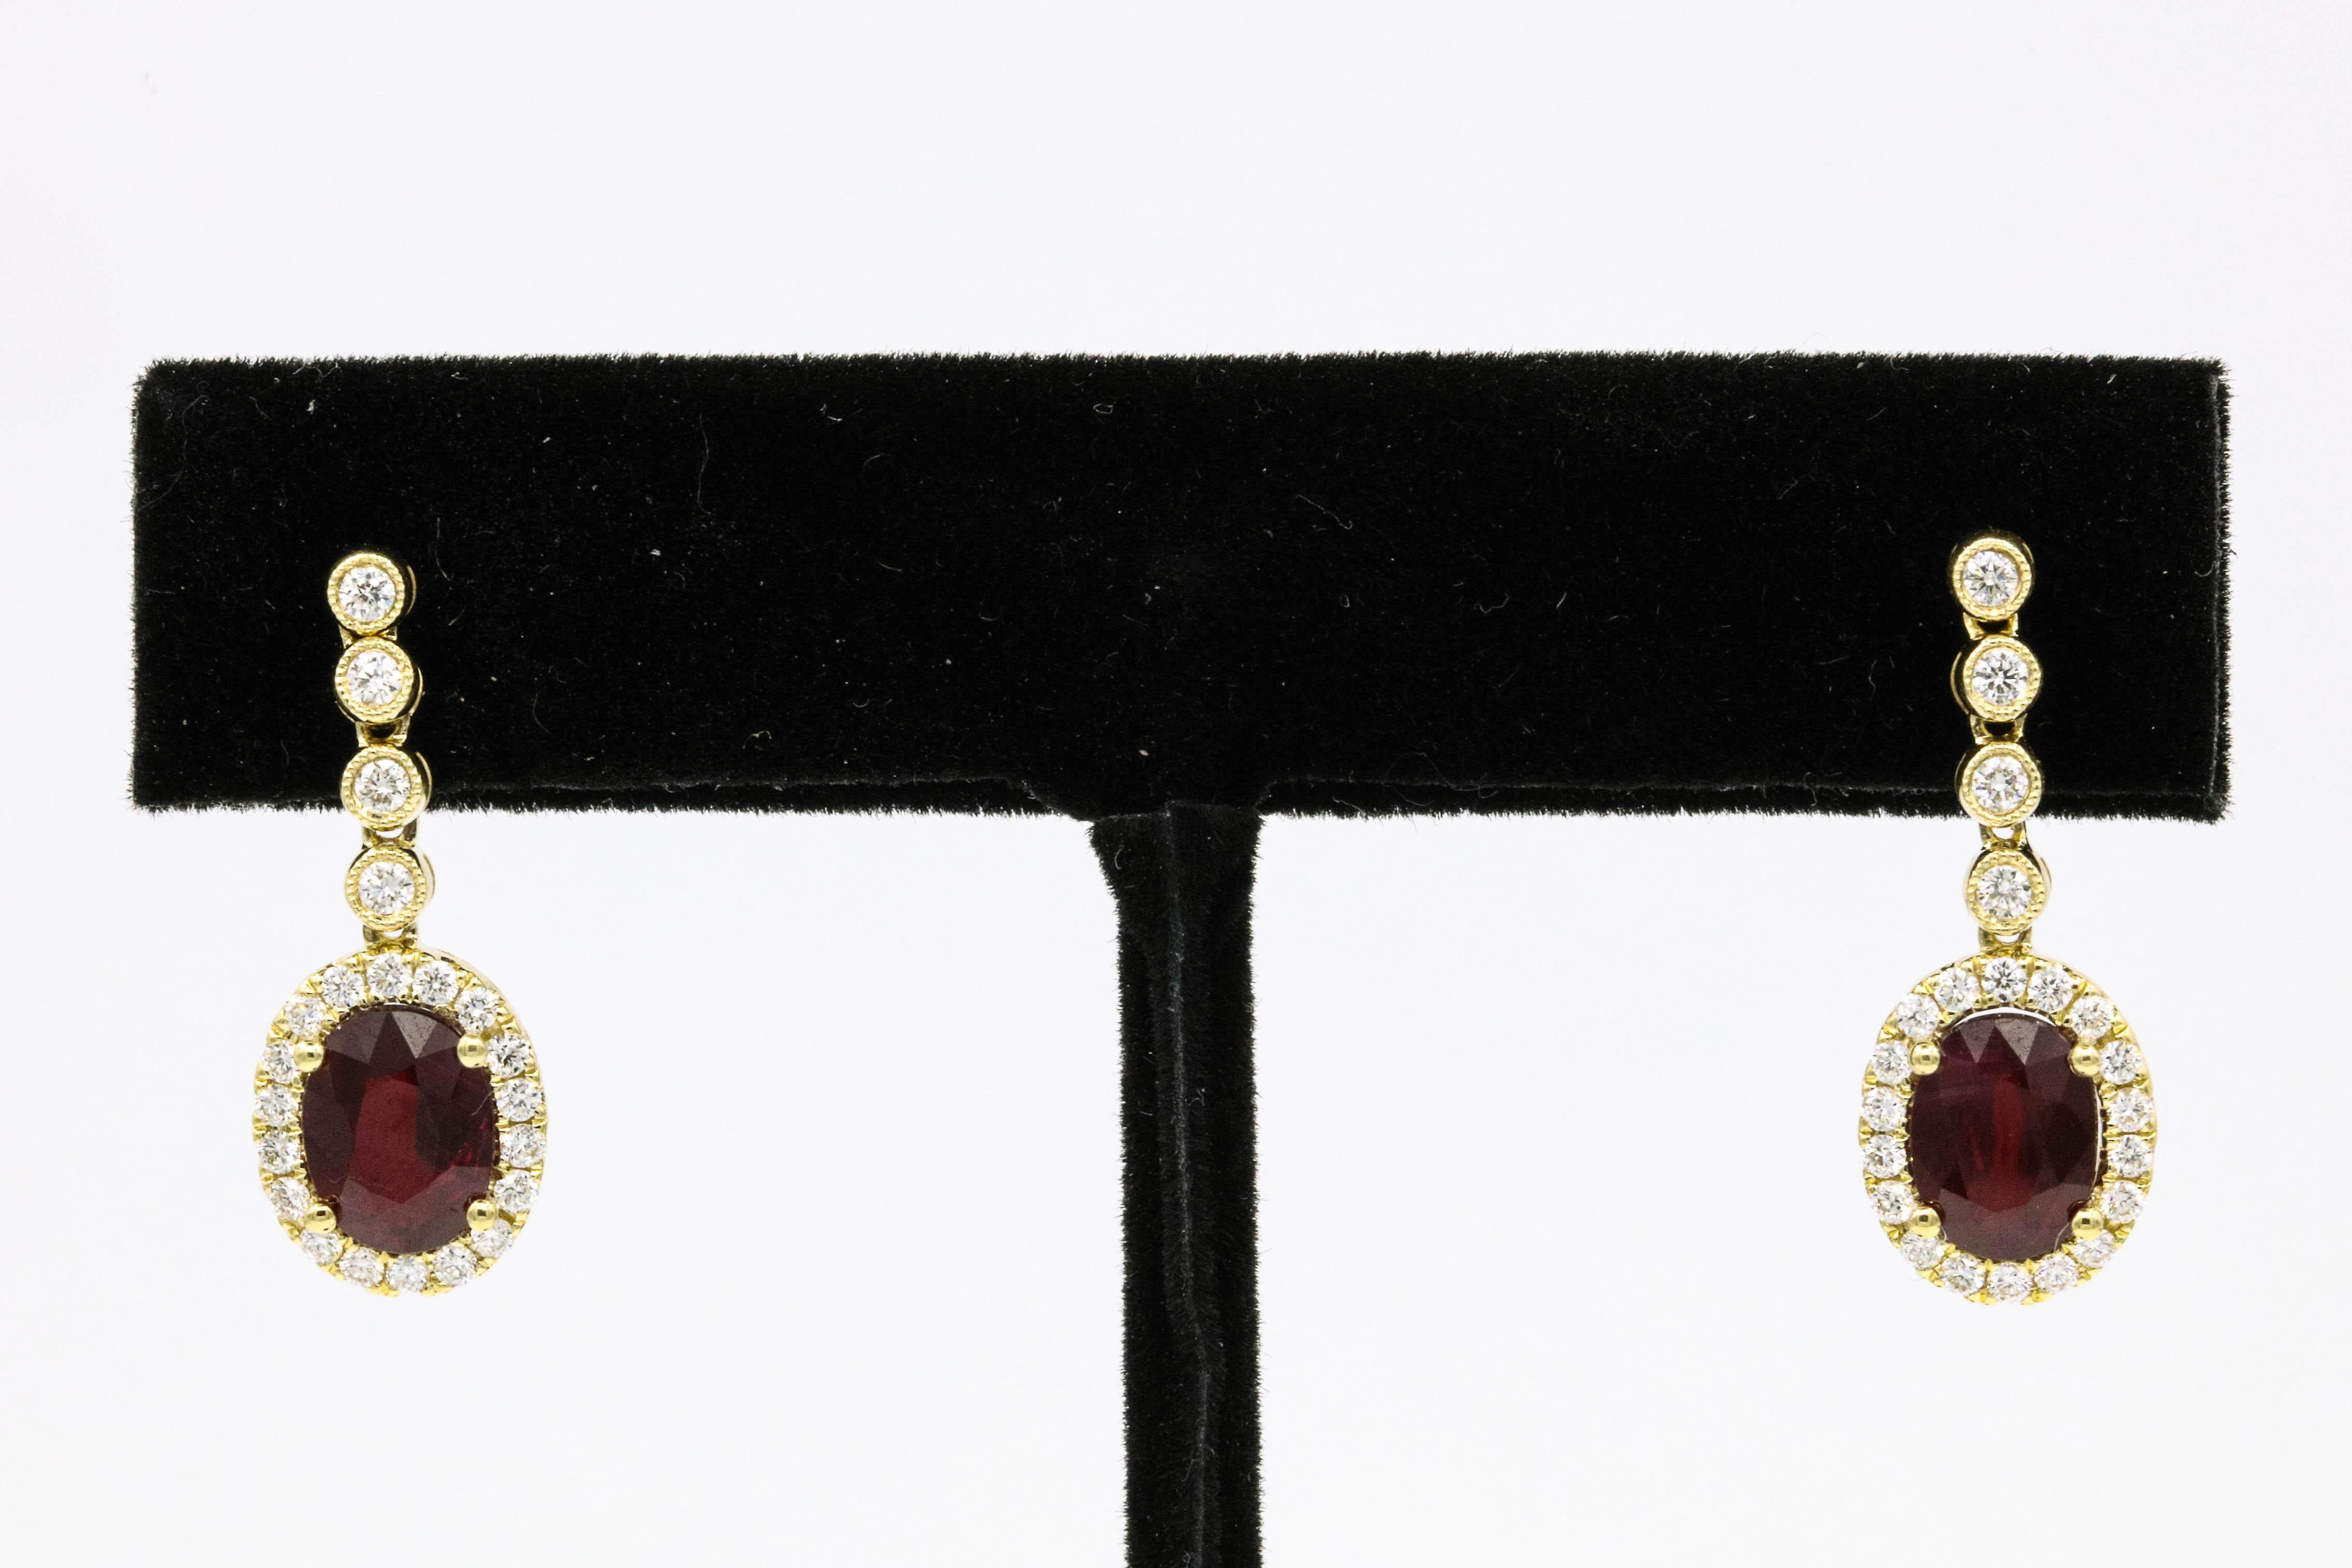 18K Yellow gold drop earrings featuring two oval shape red rubies 2.90 carats, surrounded by round brilliants weighing 0.56 carats.
Color G-H
Clarity SI